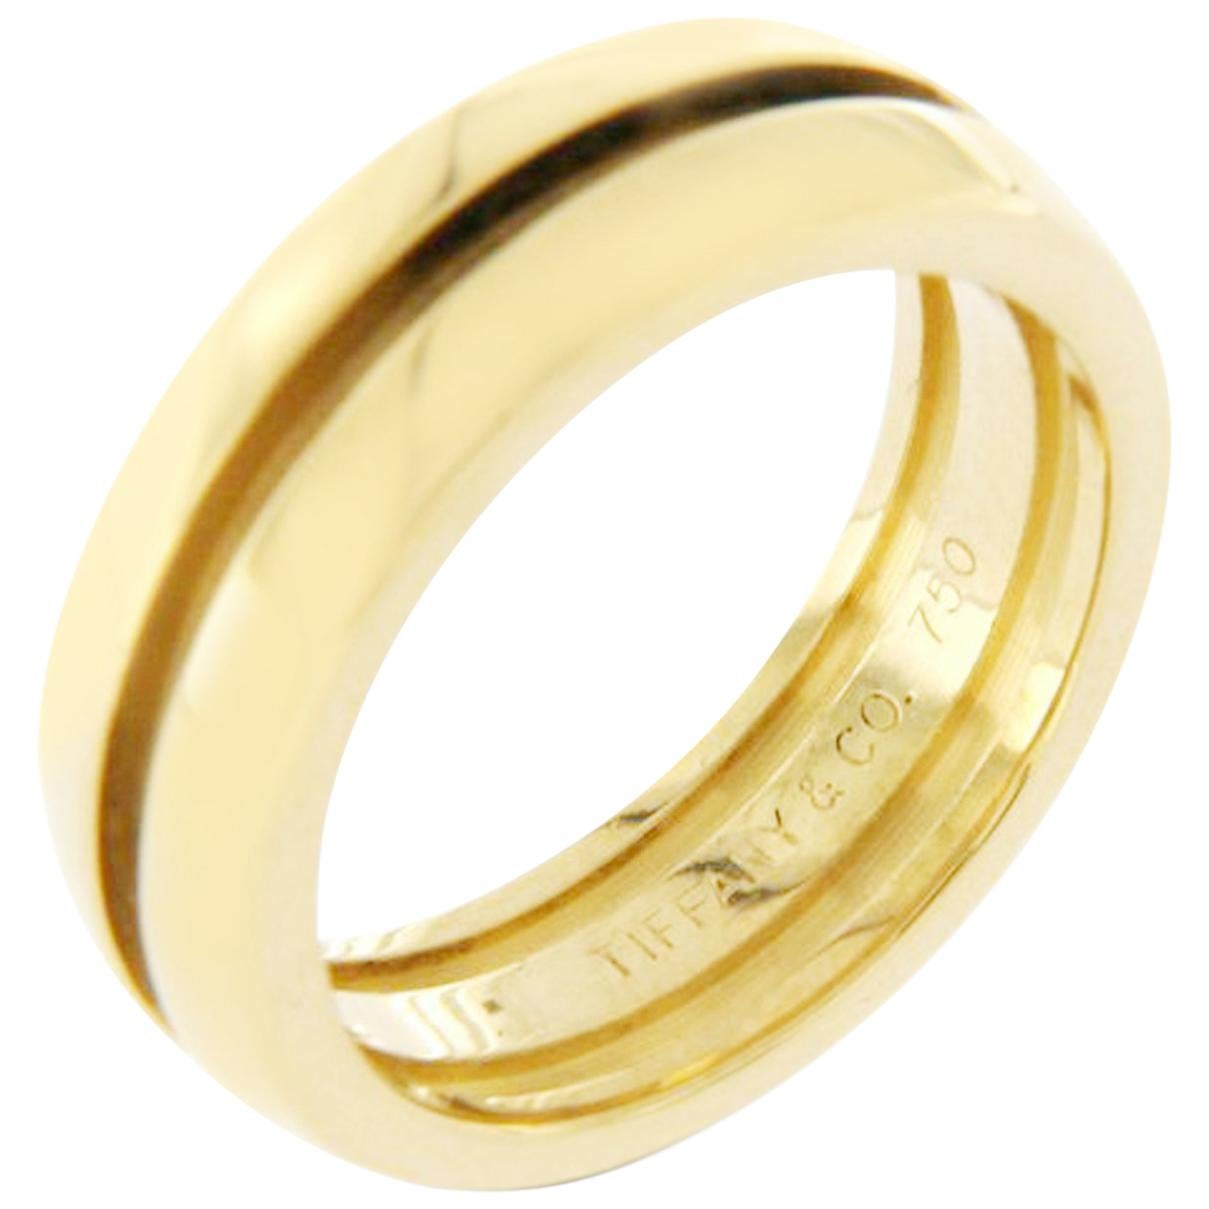 Tiffany & Co. 18 Karat Yellow Gold Grooved Dome Band Ring